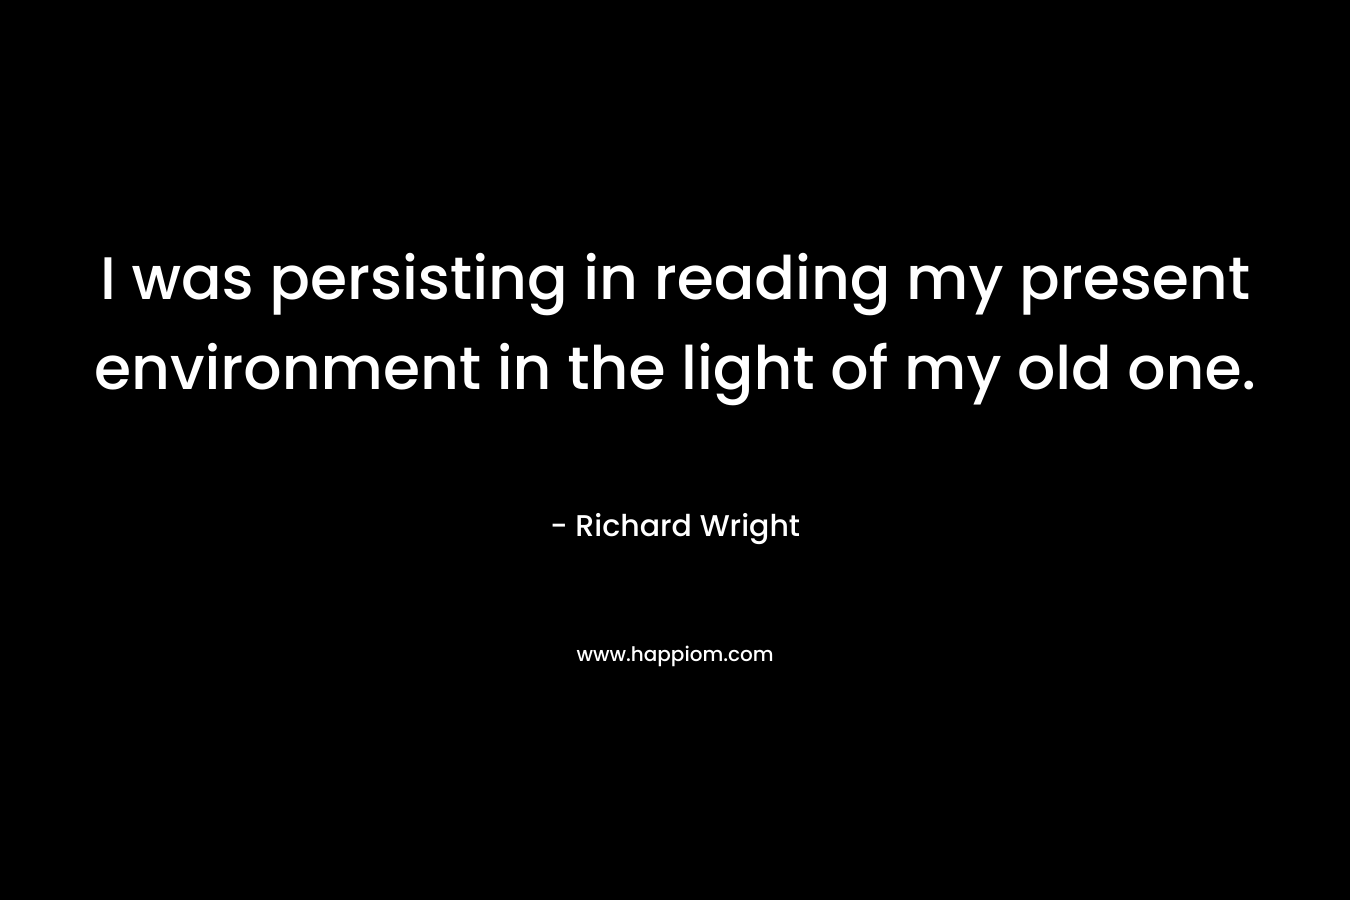 I was persisting in reading my present environment in the light of my old one. – Richard Wright